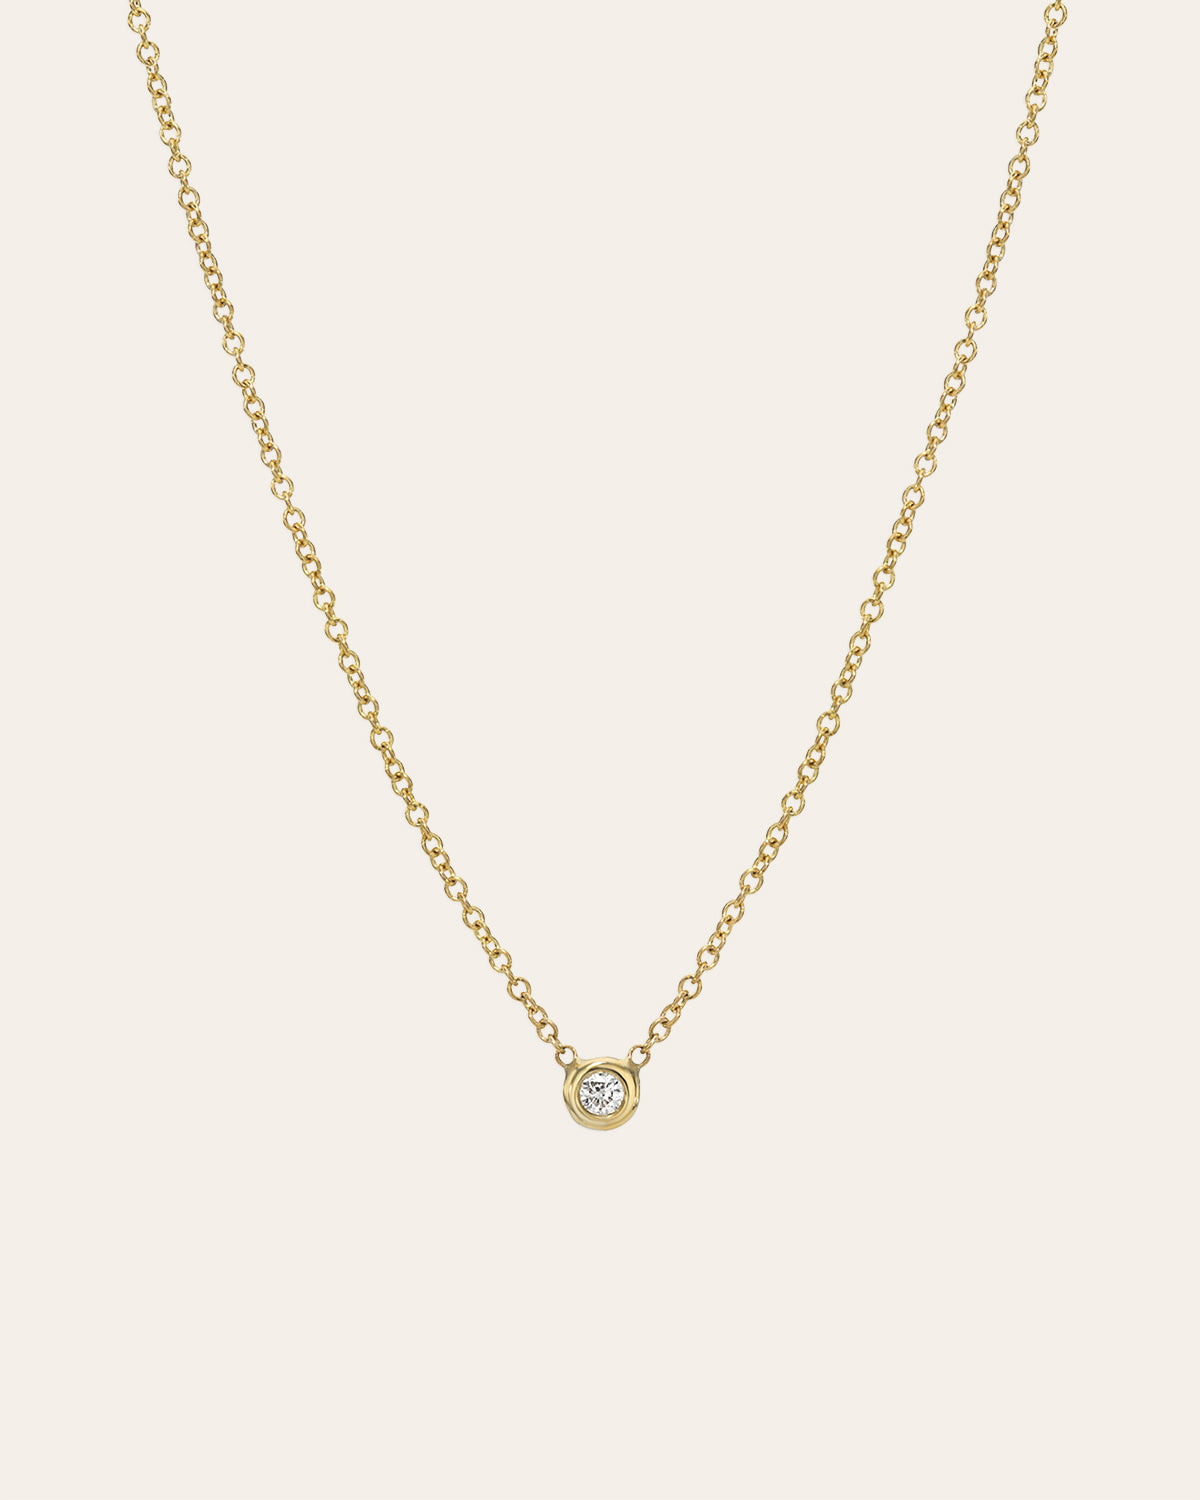 Citrine and Diamond Necklace in Yellow Gold | KLENOTA